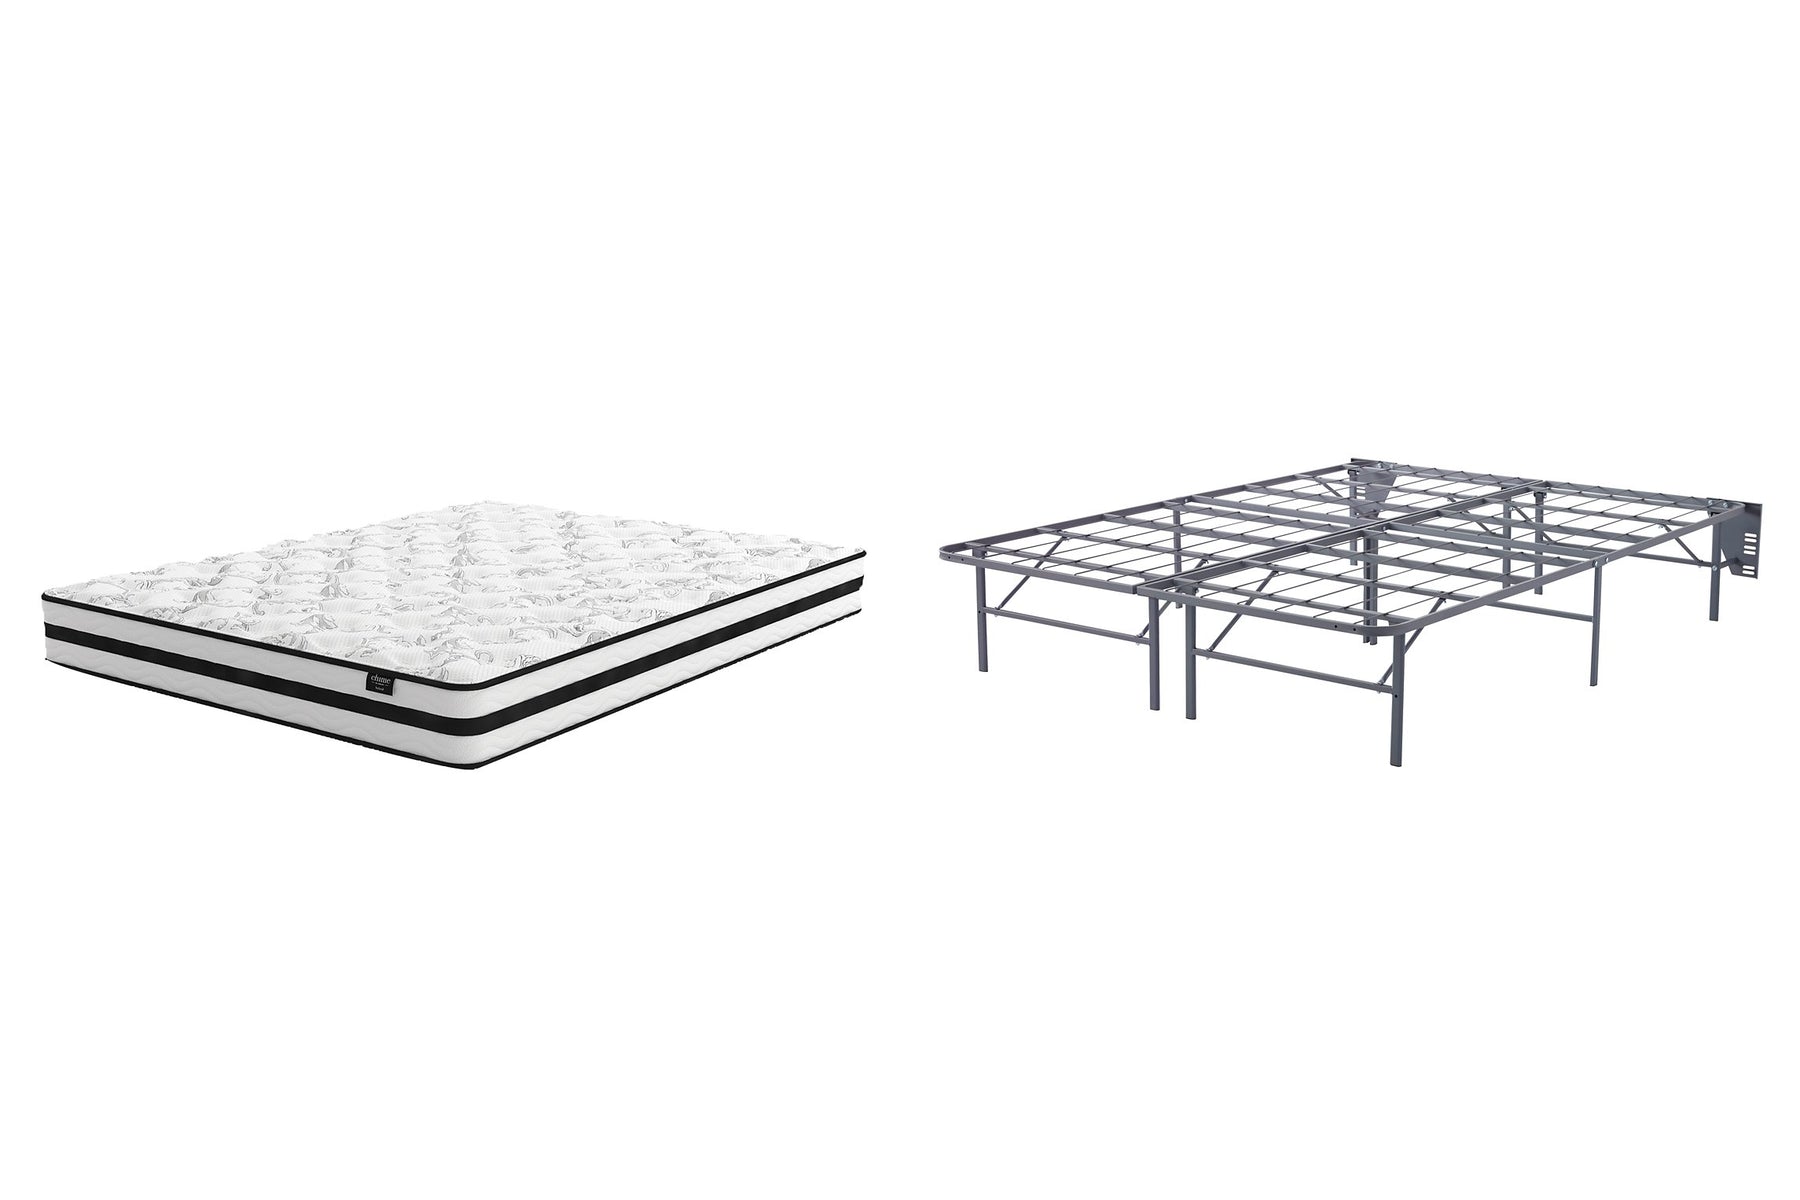 8 Inch Chime Innerspring Mattress Set 8 Inch Chime Innerspring Mattress Set Half Price Furniture